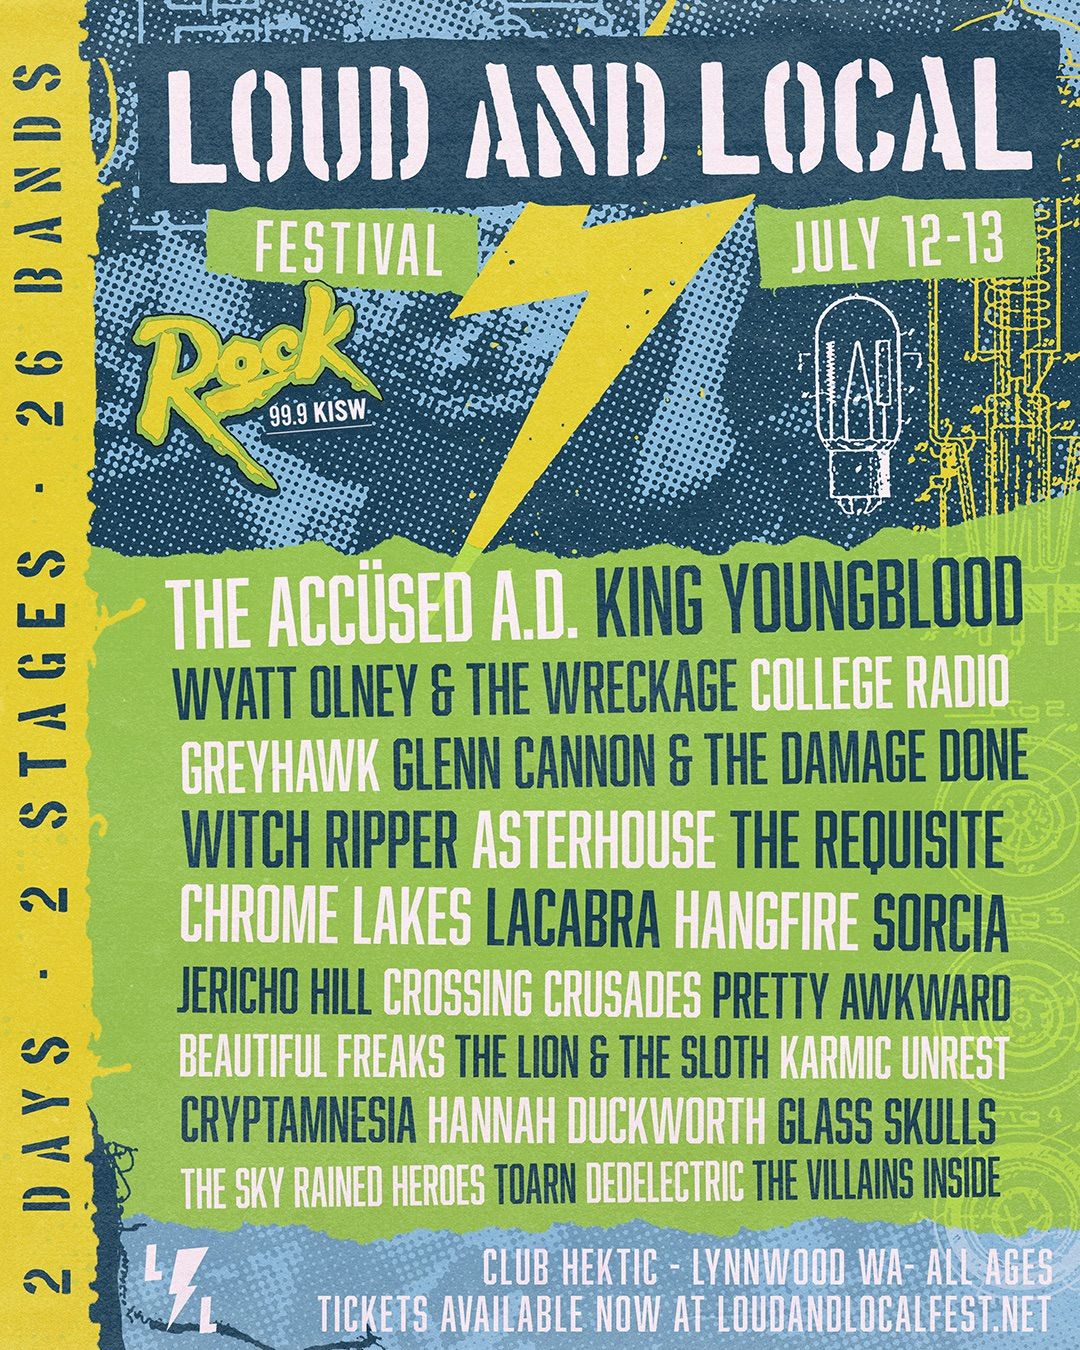 LOUD AND LOCAL FESTIVAL - 99.9 KISW ROCK